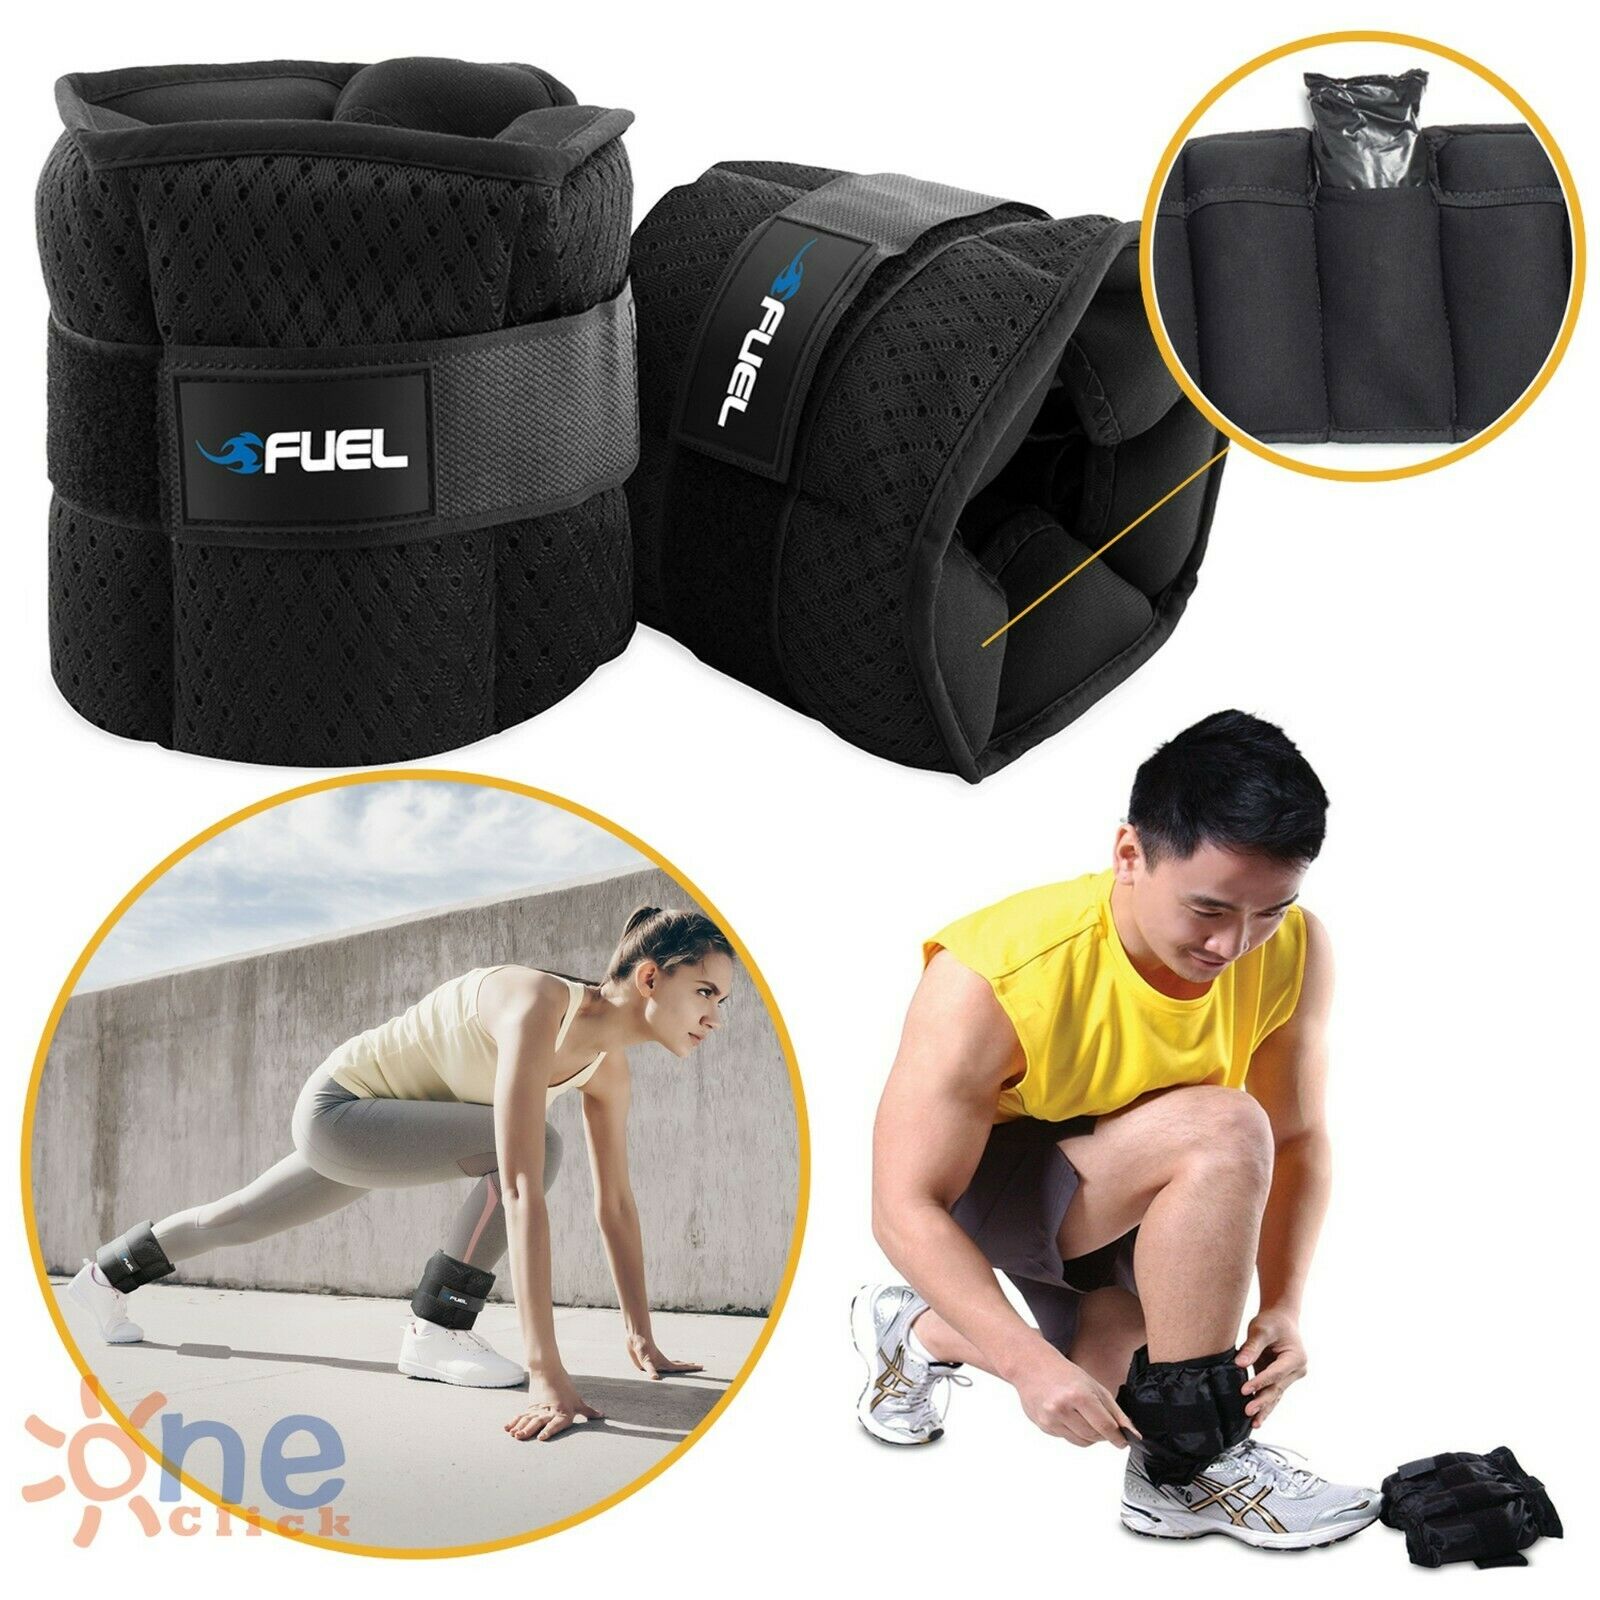 5 Lbs Adjustable Ankle Weights Running Pair Of Leg Wrist Arm Home Gym Exercise